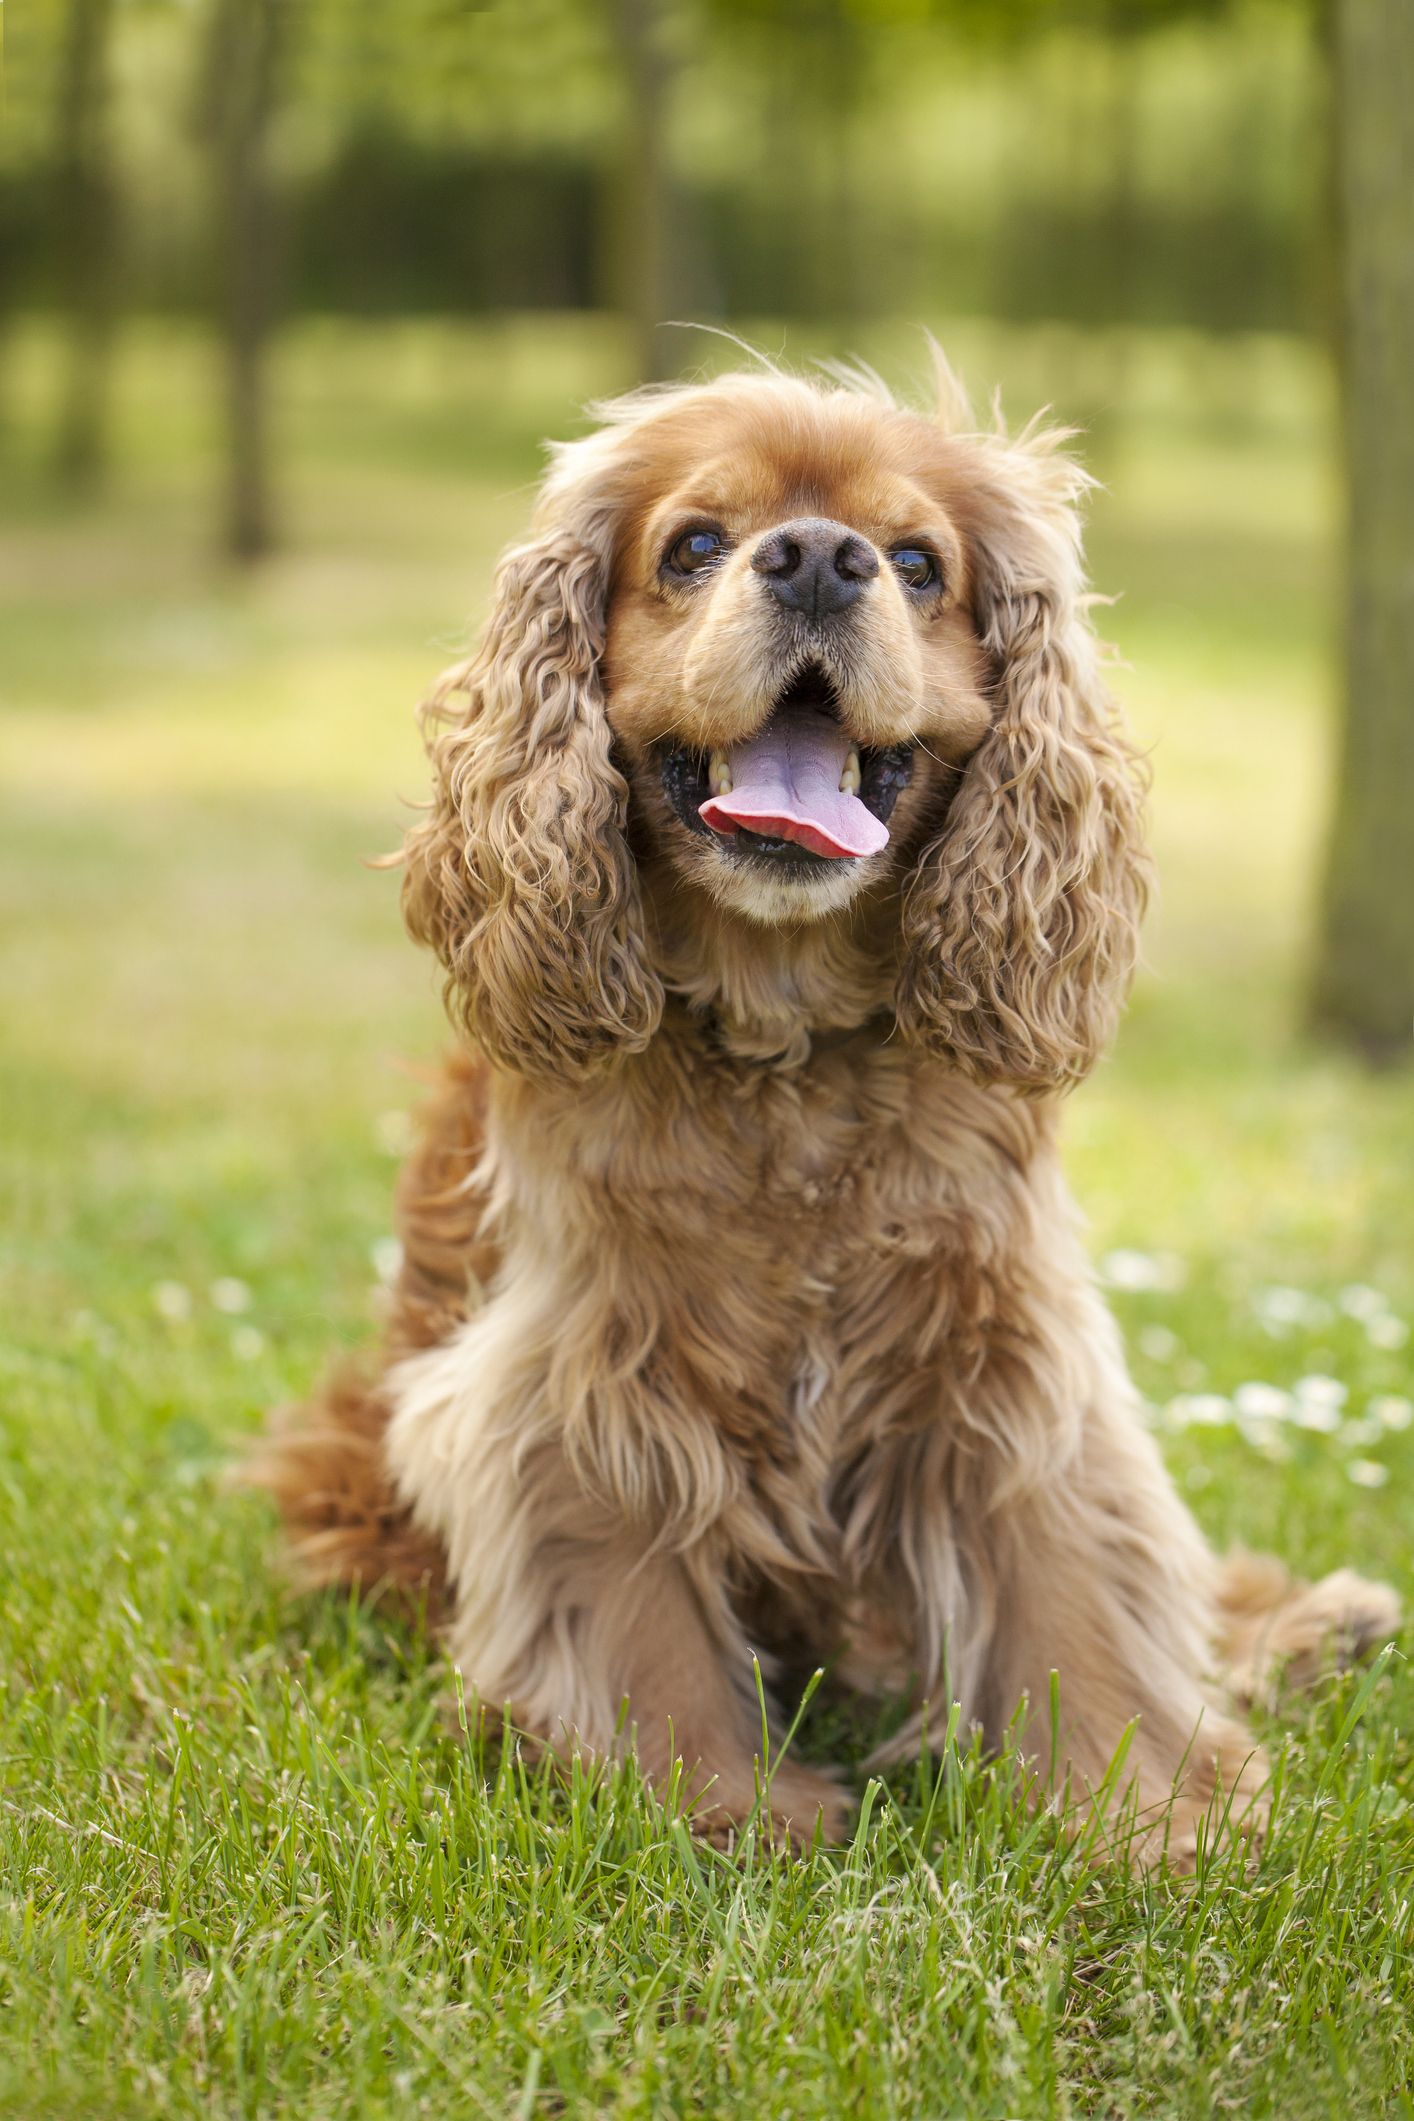 cute and friendly dog breeds